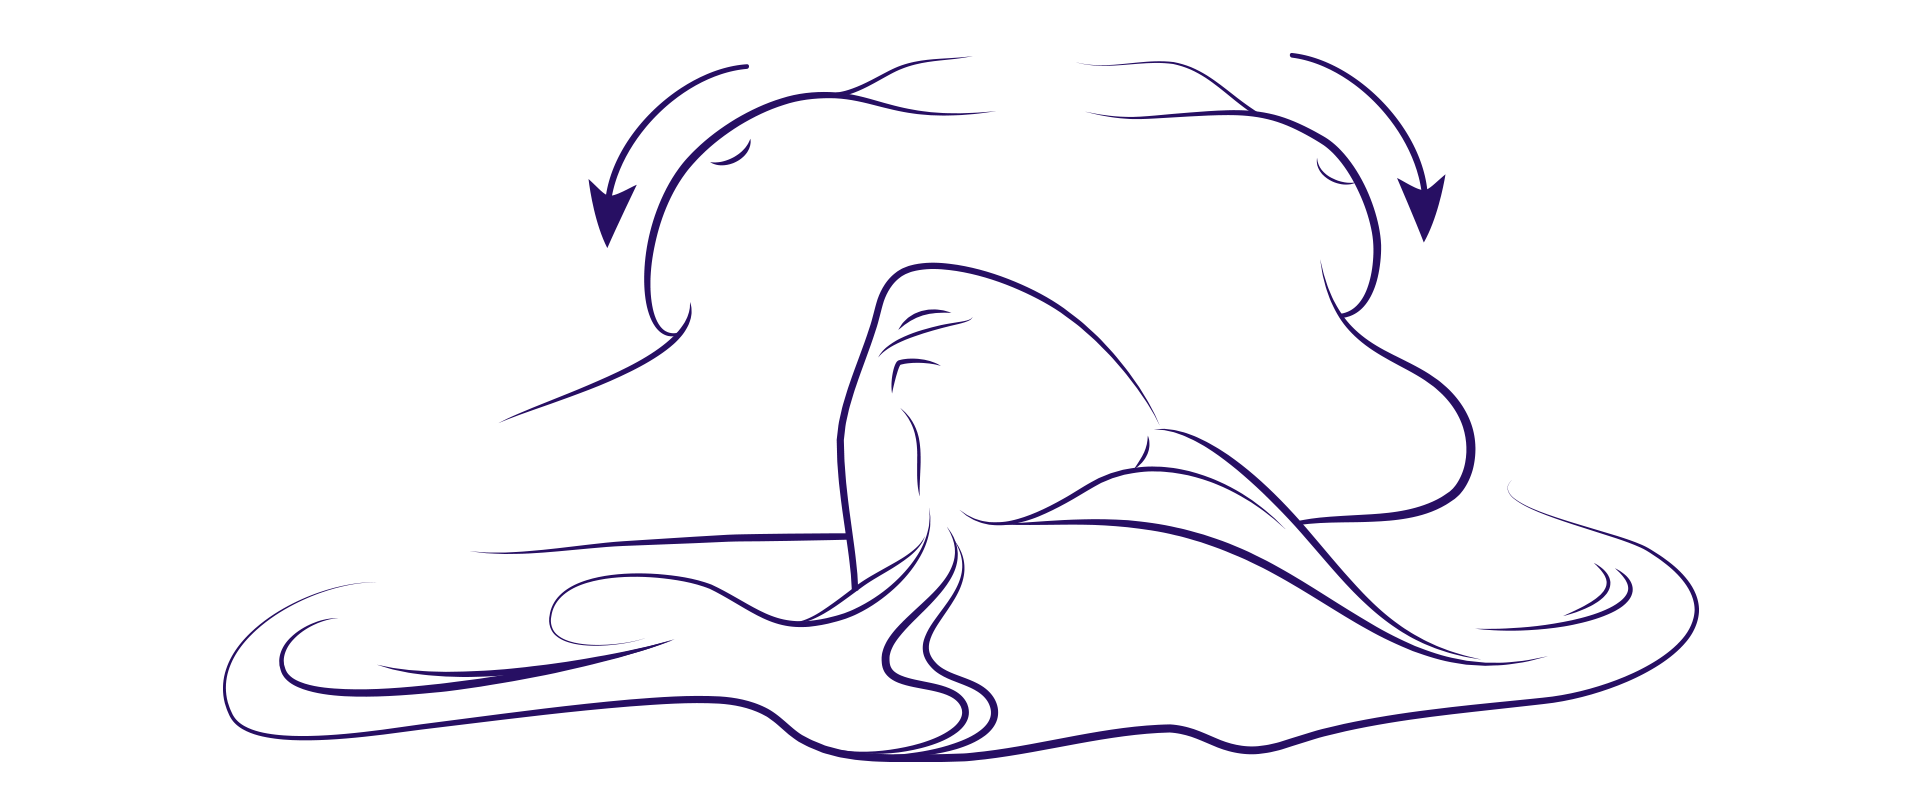 drawing of woman sleeping on her back illustration the use of an anti-wrinkle bra